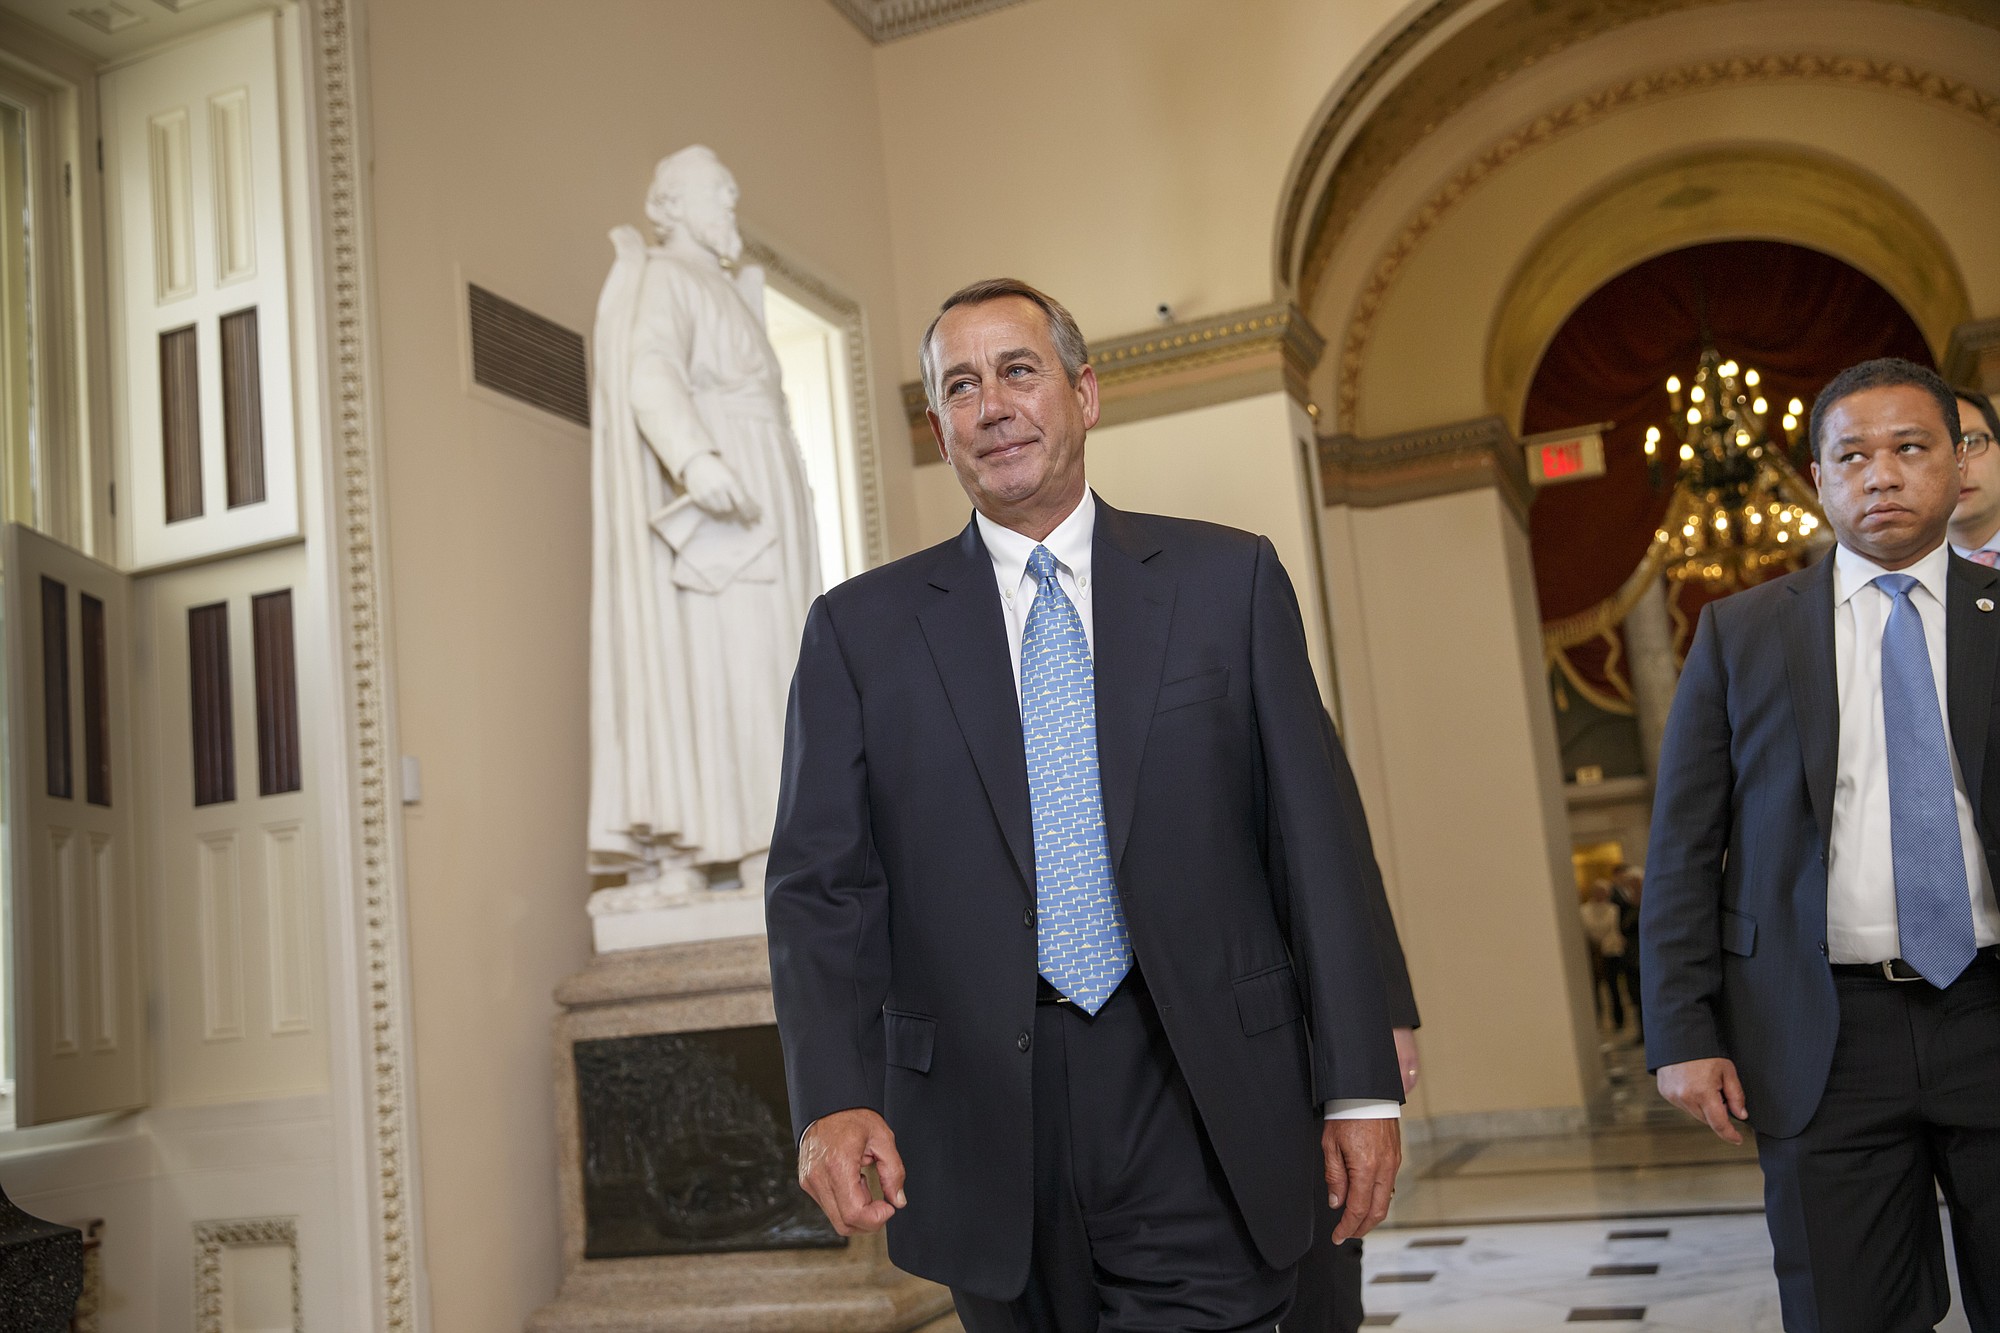 House Speaker John Boehner of Ohio walks to the House chamber on Capitol Hill on Friday in Washington for a procedural vote.